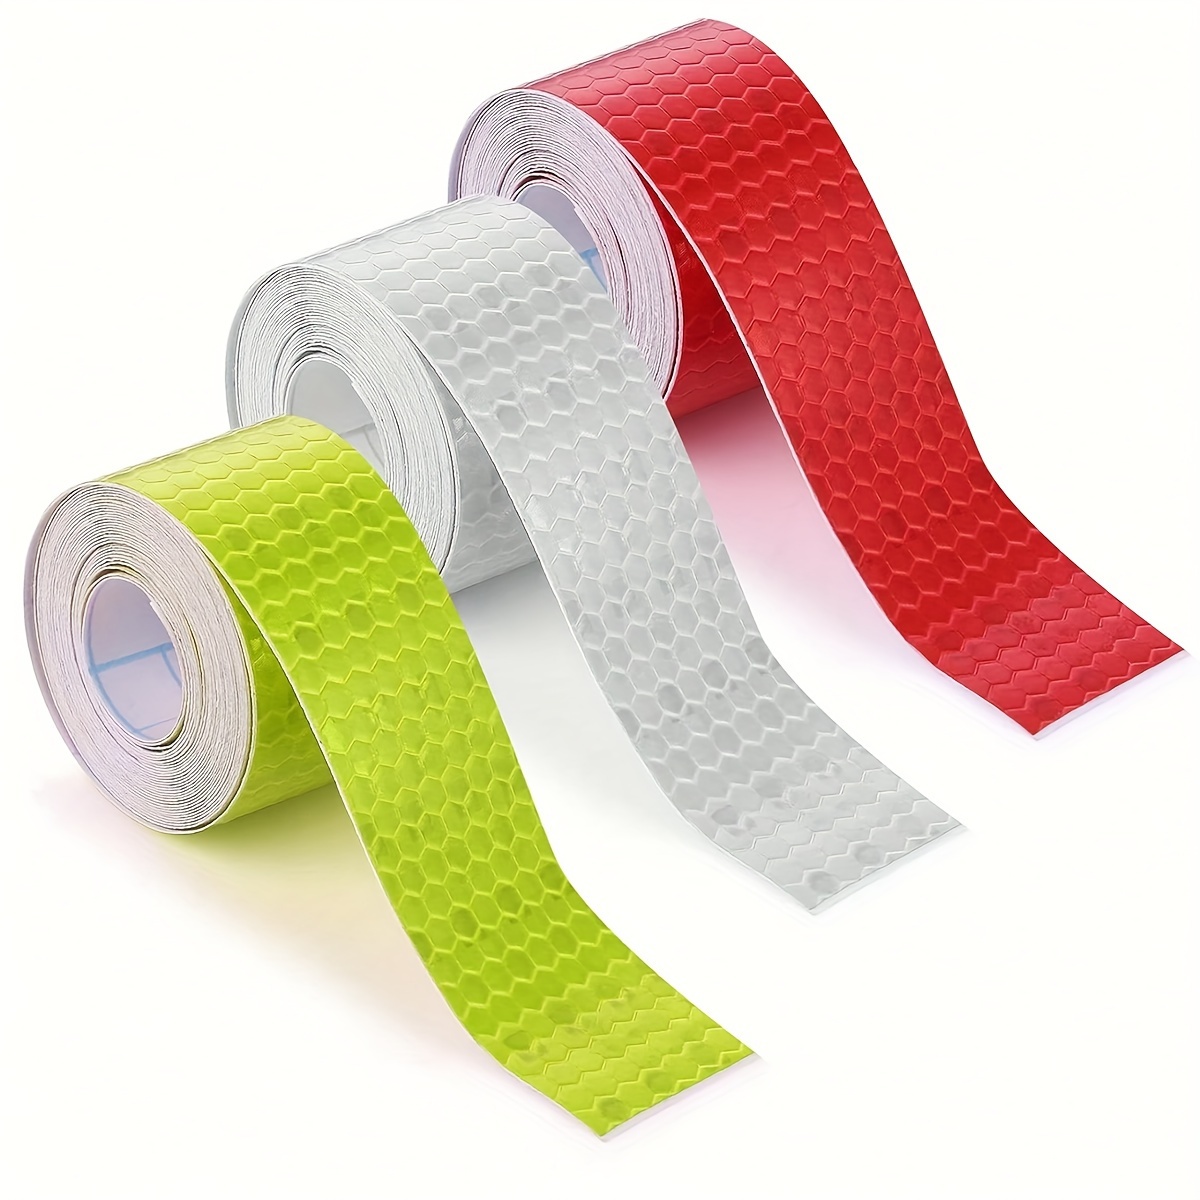 2 in. x 30 ft. Reflective Tape - Red & Silver Stripes